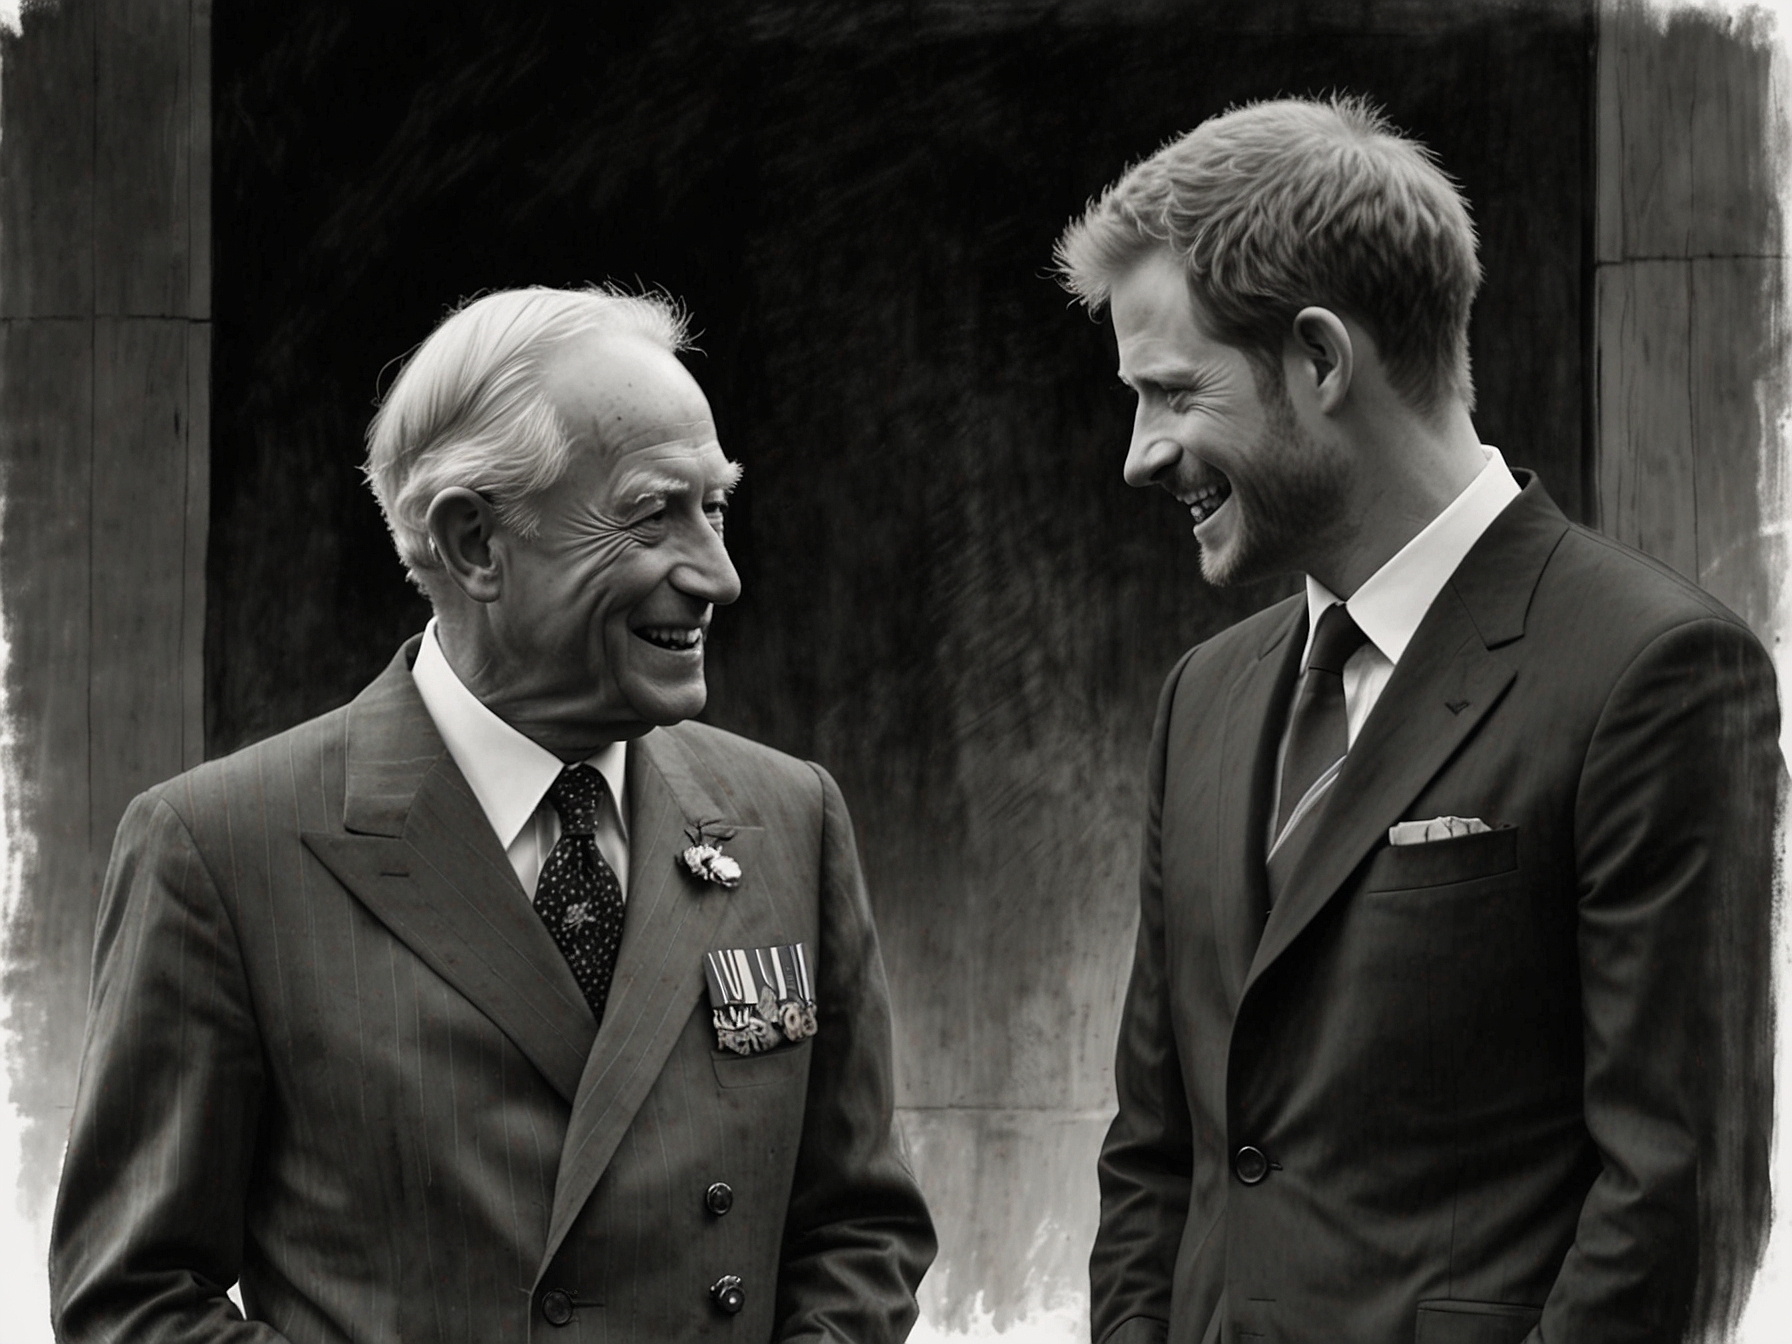 King Charles III and Prince Harry sharing a candid moment, reflecting their ongoing commitment to maintaining familial bonds despite public disagreements.